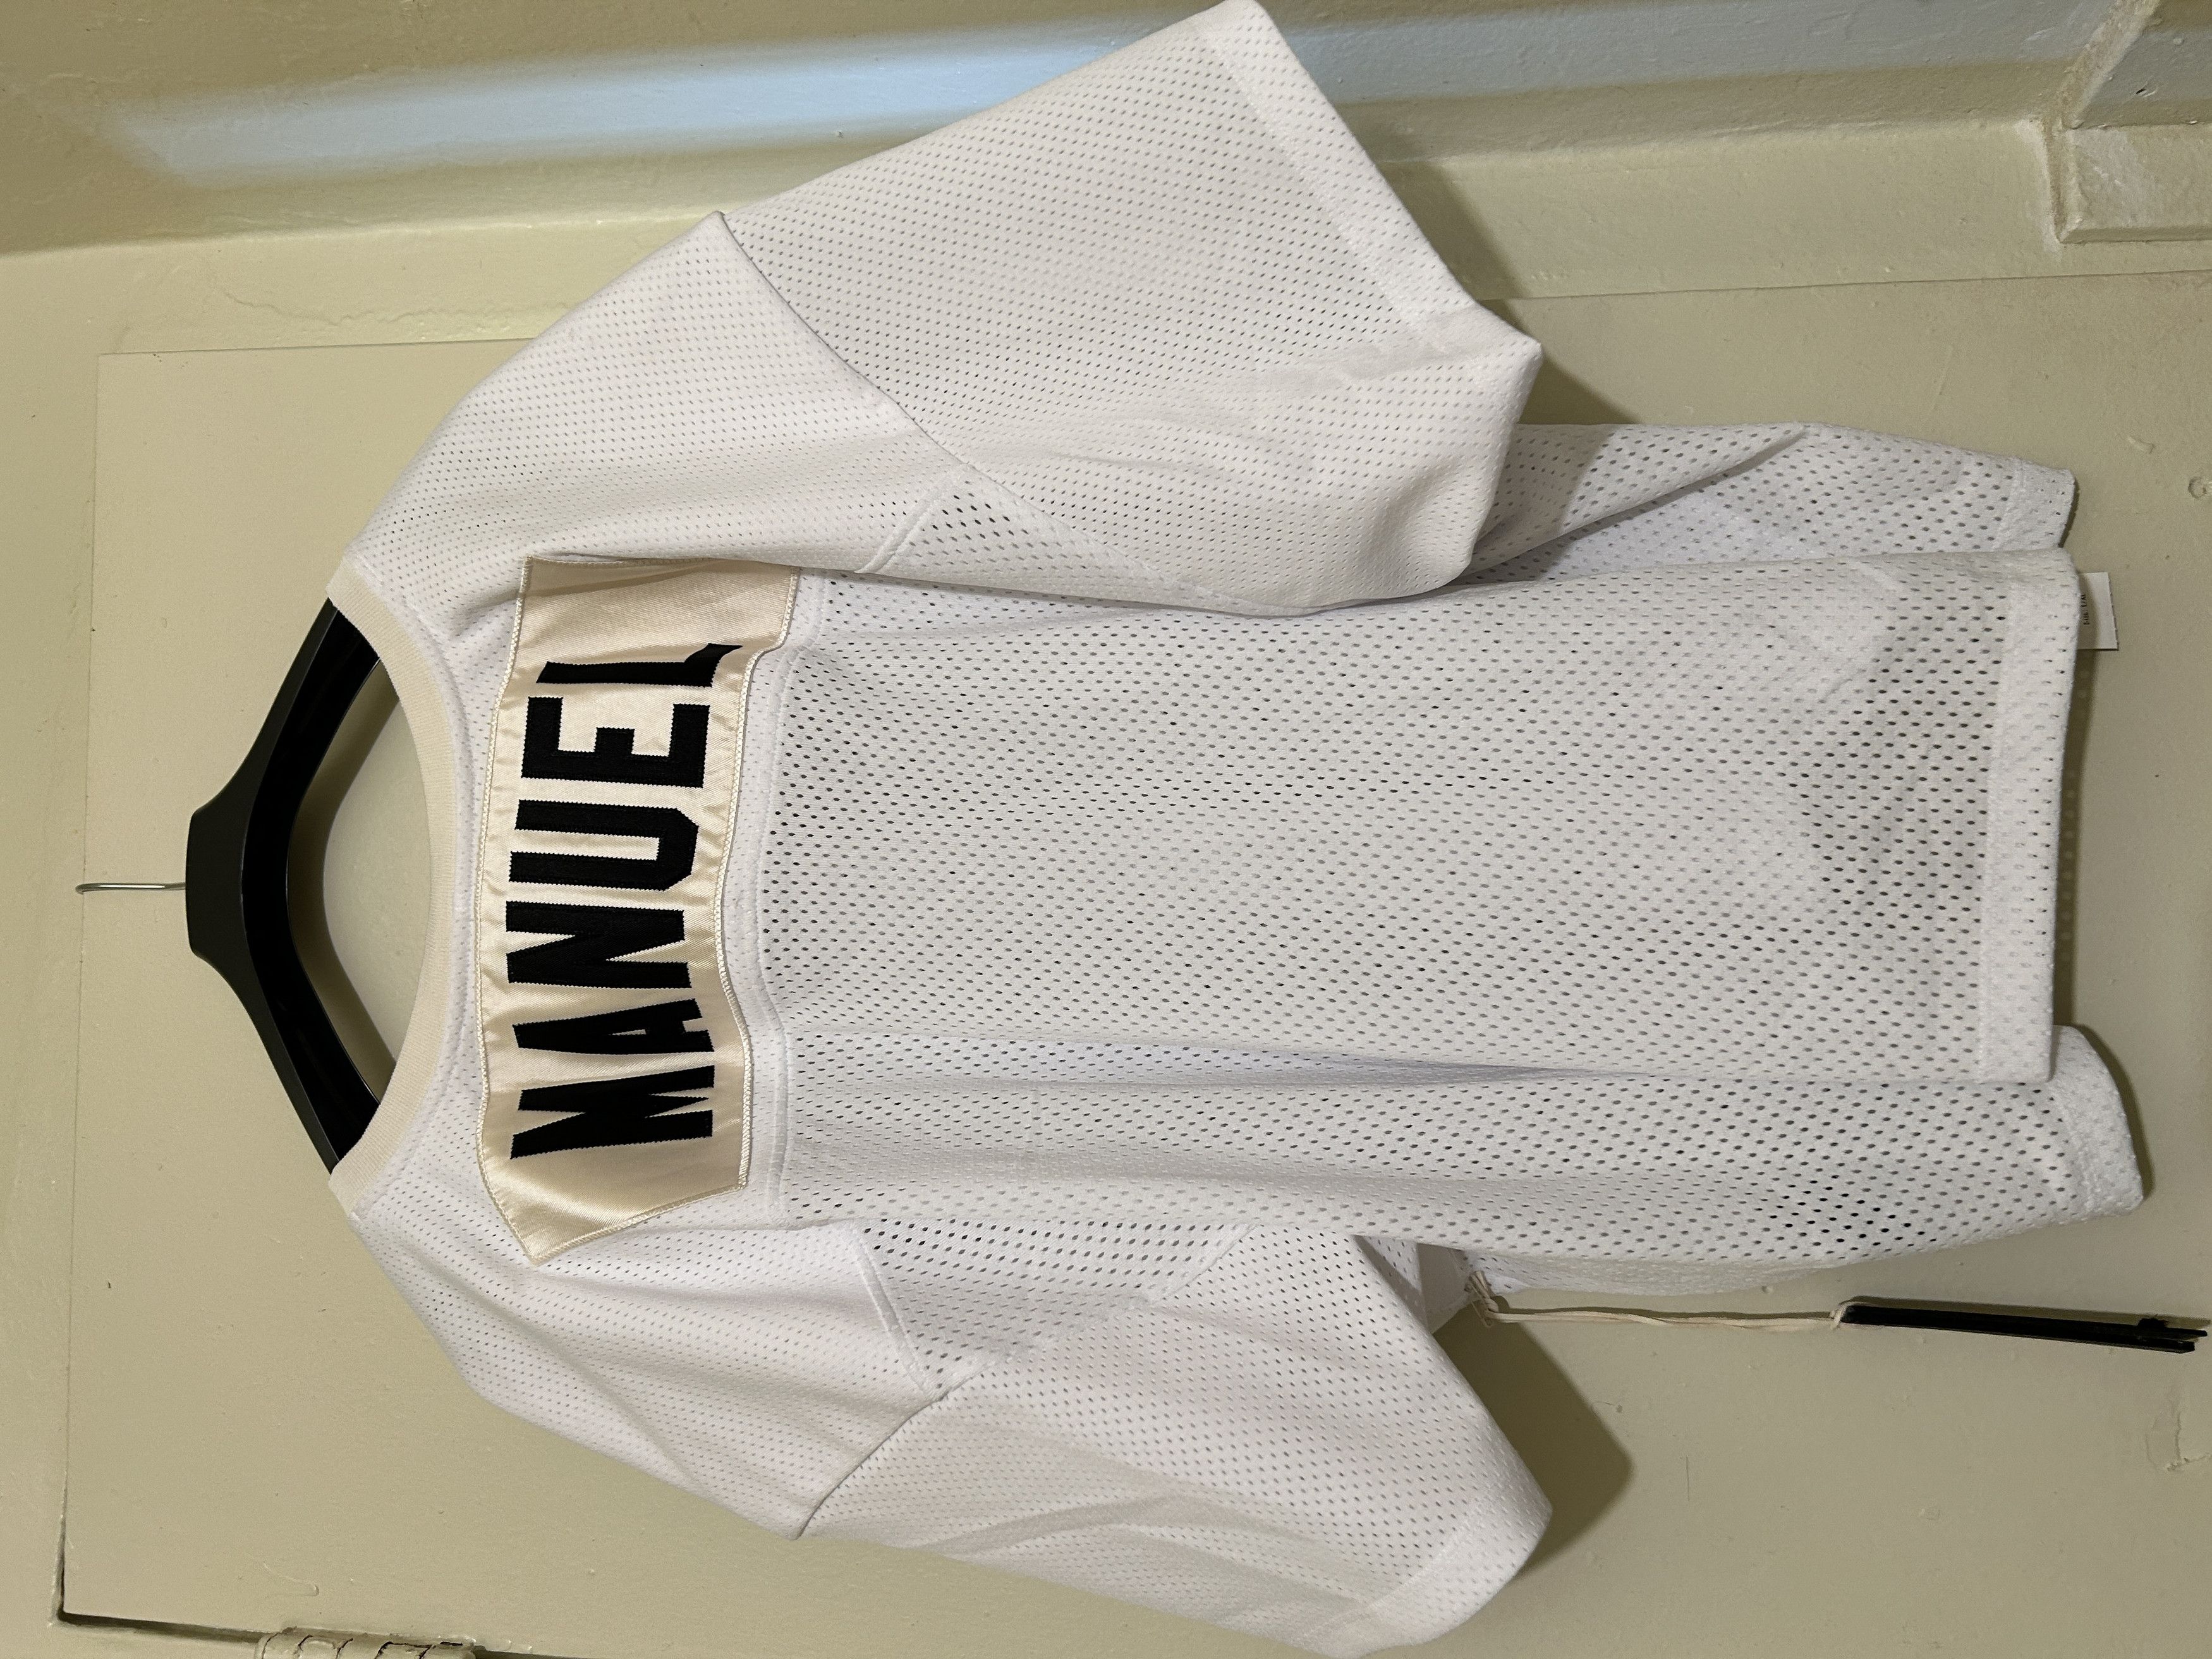 Fear of God 5th collection V-Neck Mesh Football Jersey 'Manuel' | Grailed